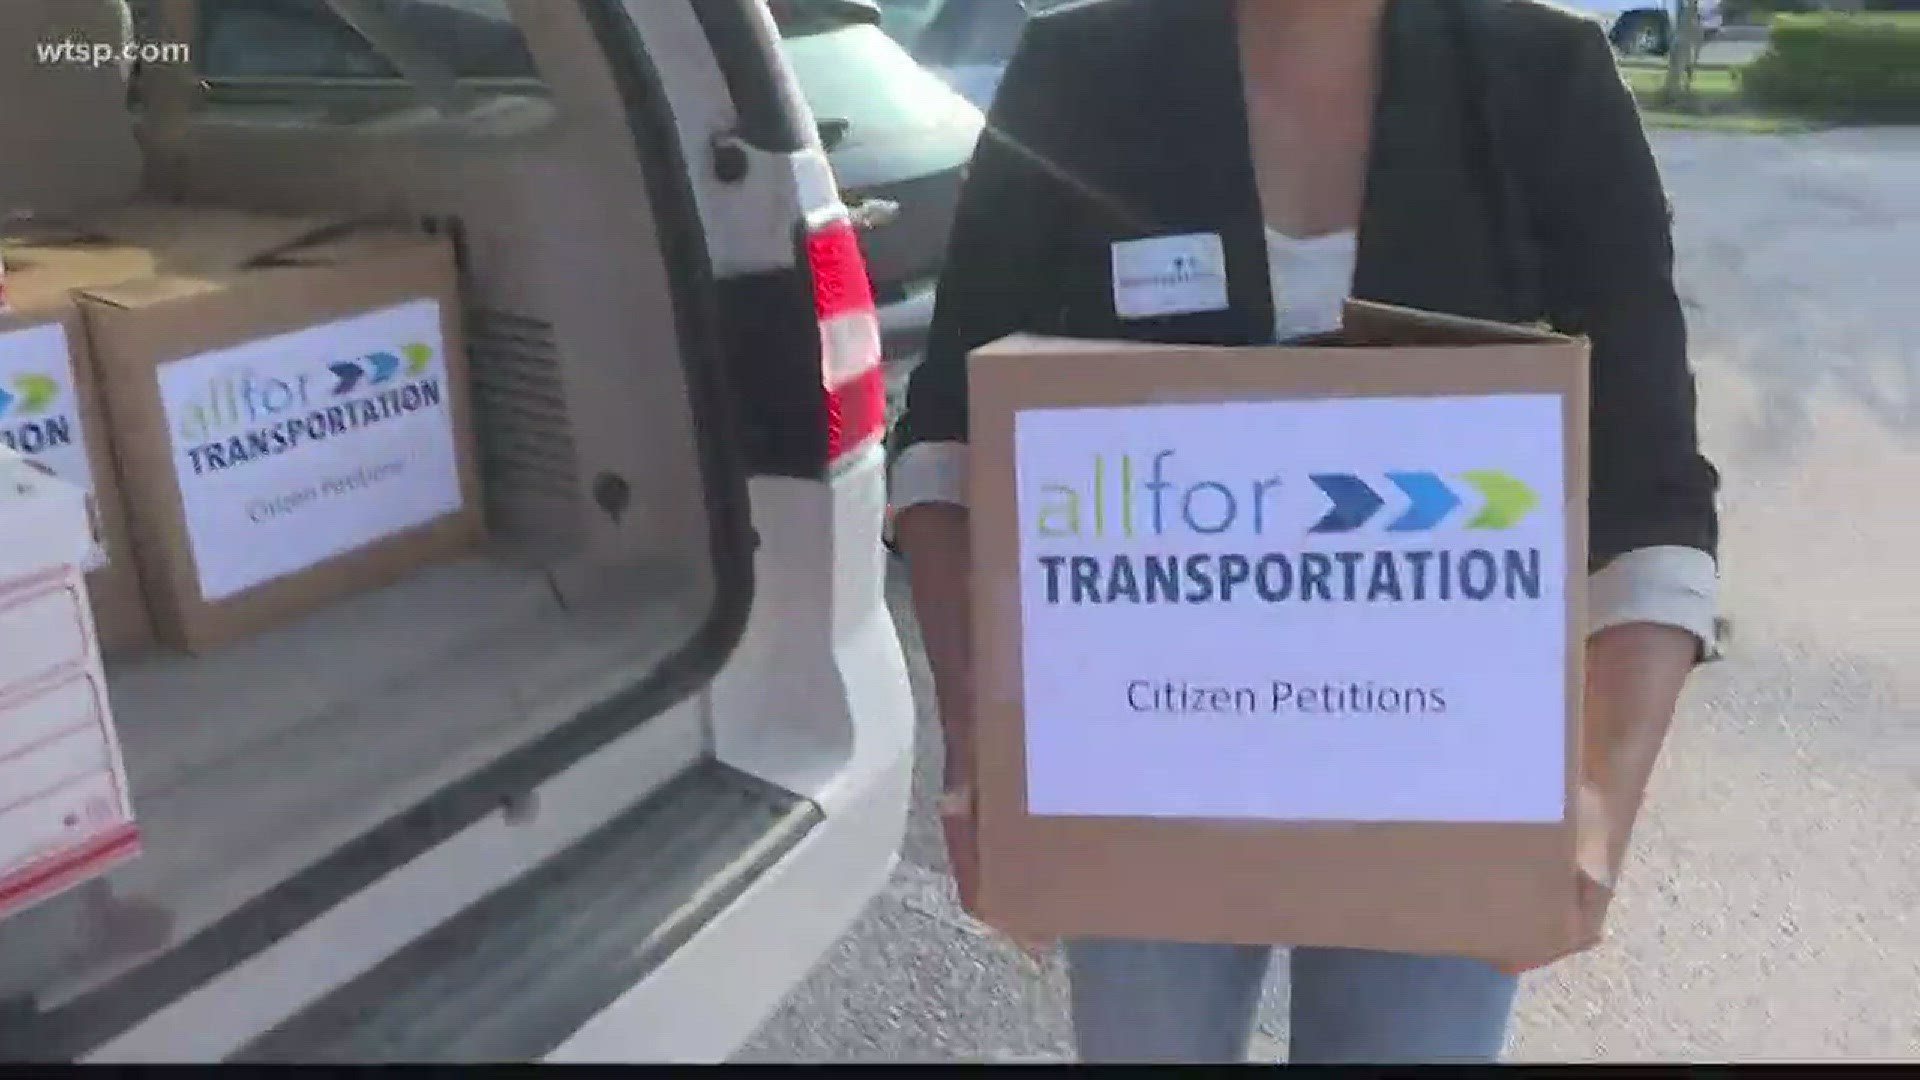 If you live in Hillsborough County, it looks like you might get the chance to vote on a transportation tax increase in the up and coming November election.